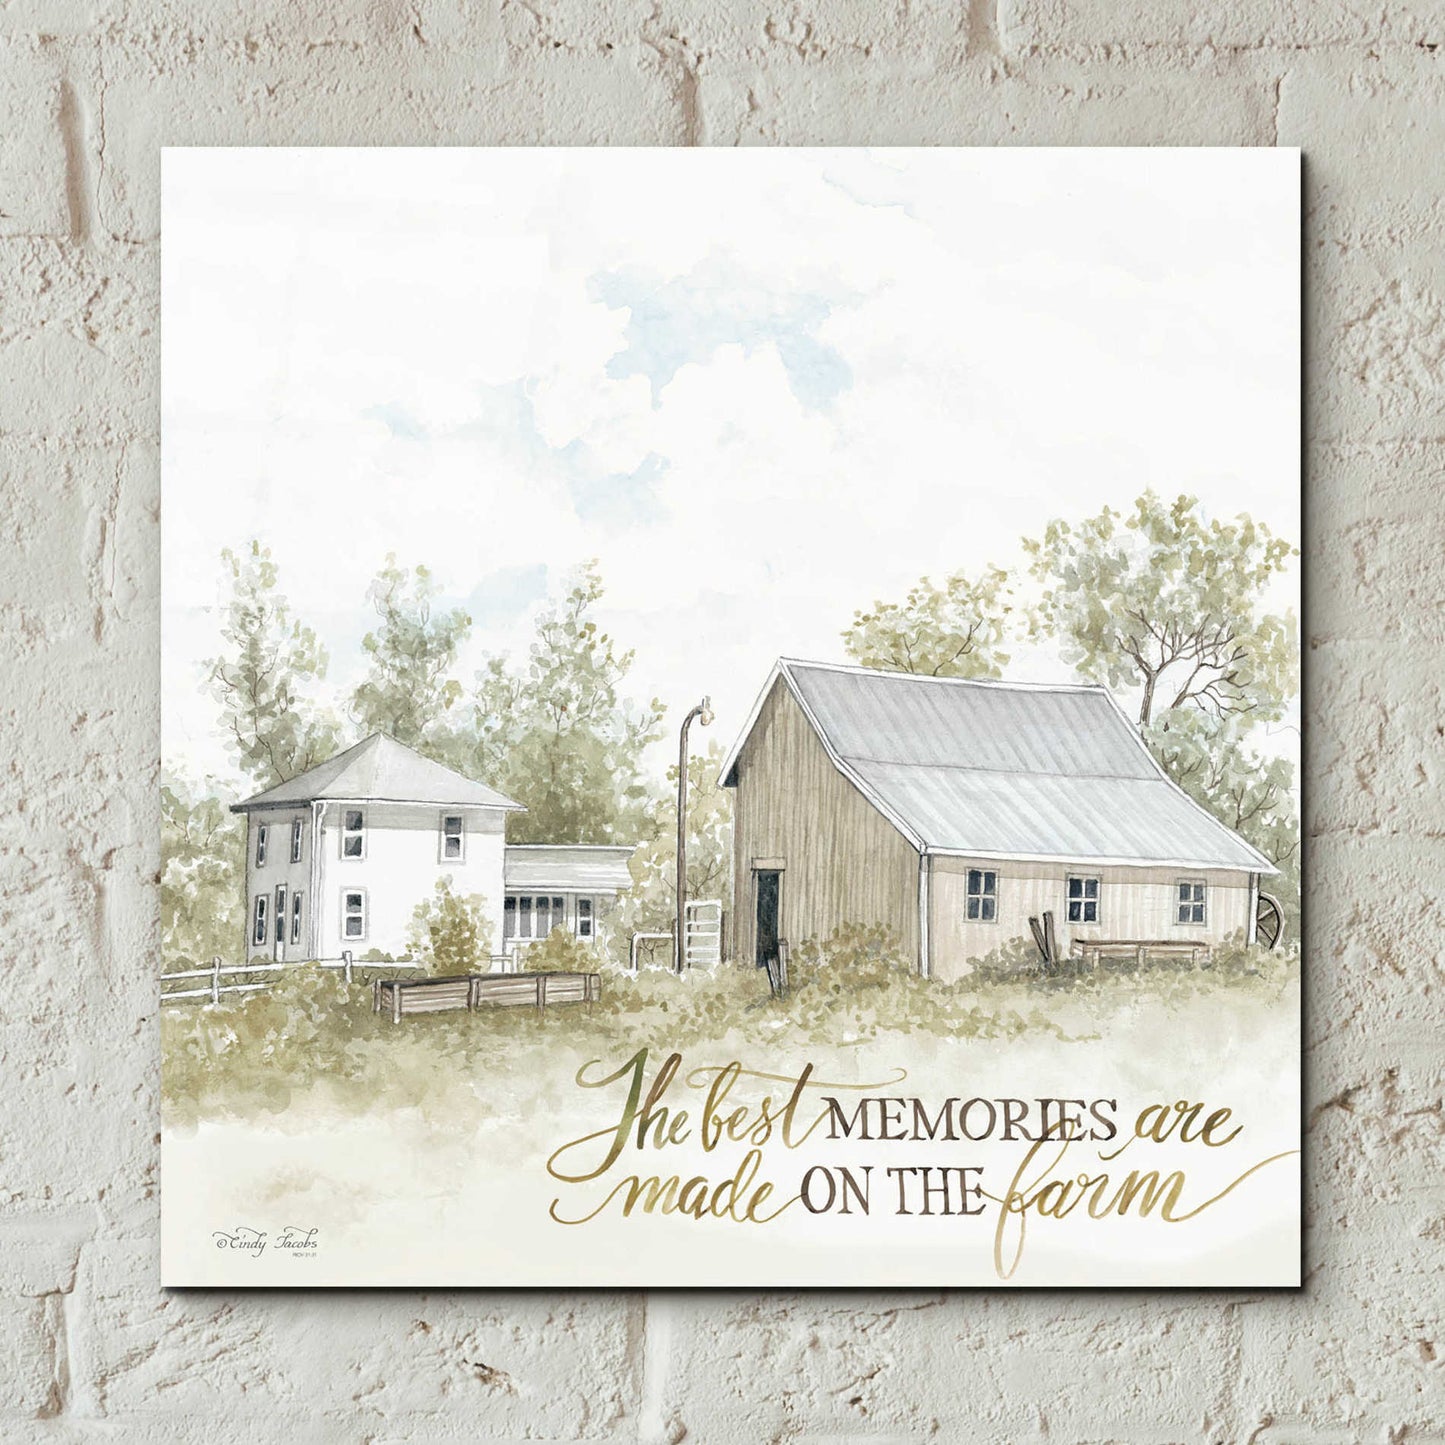 Epic Art 'The Best Memories' by Cindy Jacobs, Acrylic Glass Wall Art,12x12